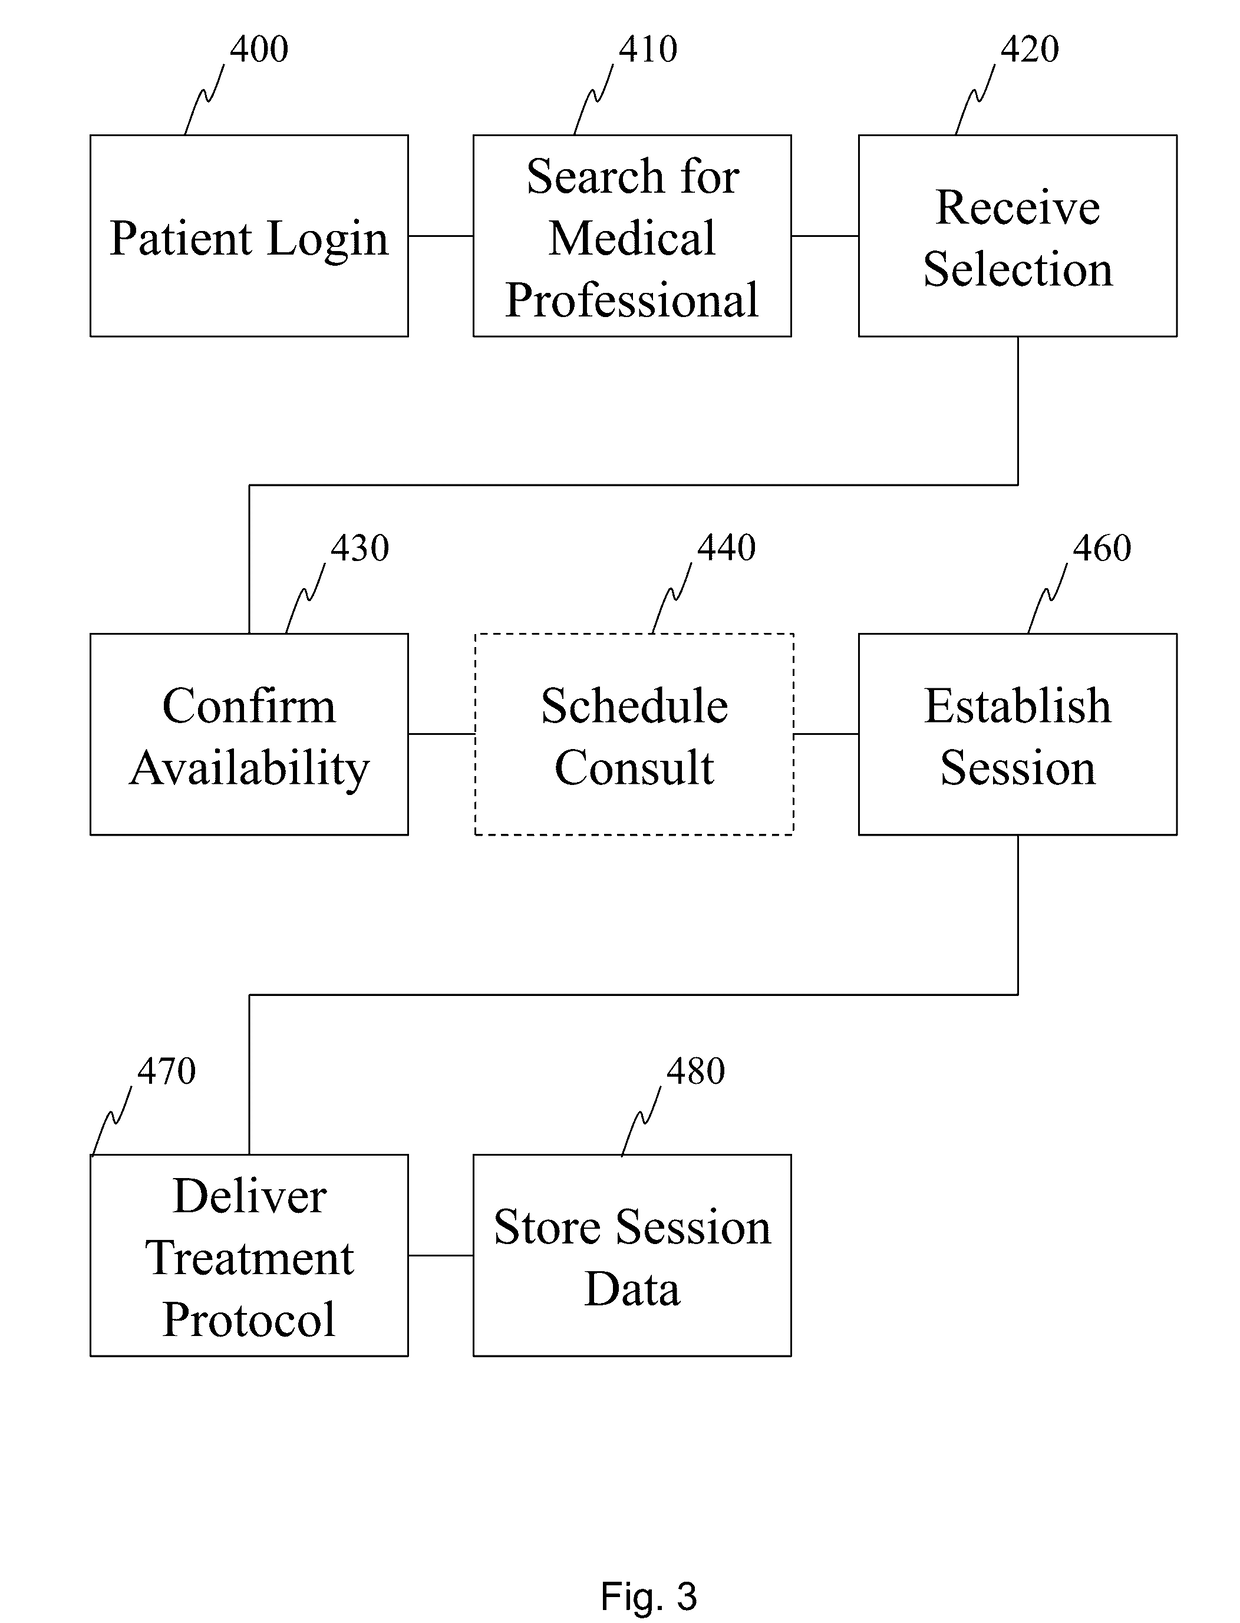 Systems and methods for computerized patient access and care management